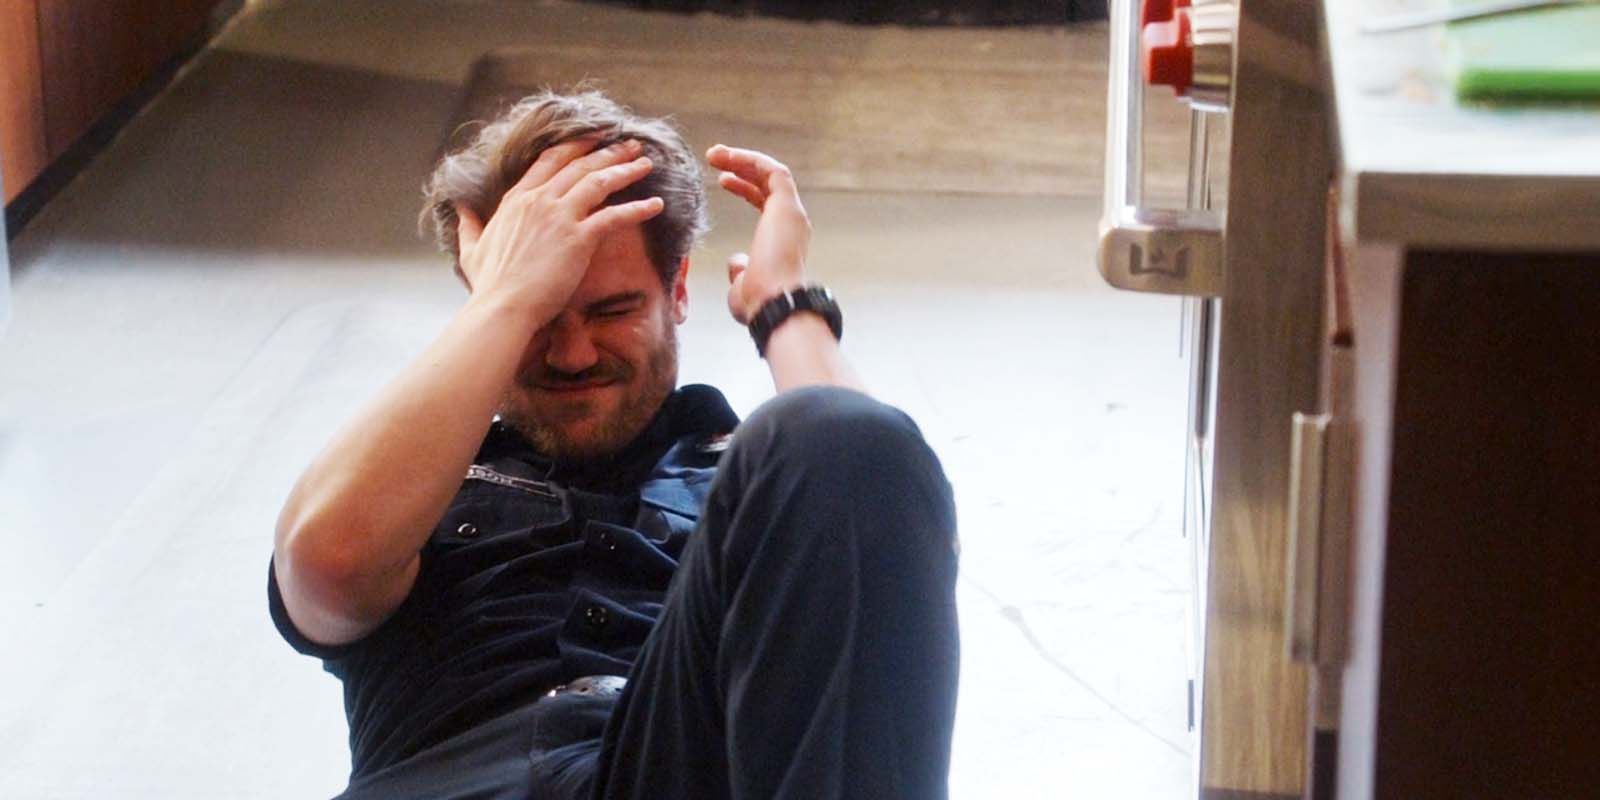 Jack Collapsing In Station 19 Season 6's Finale Wasn't The First Time